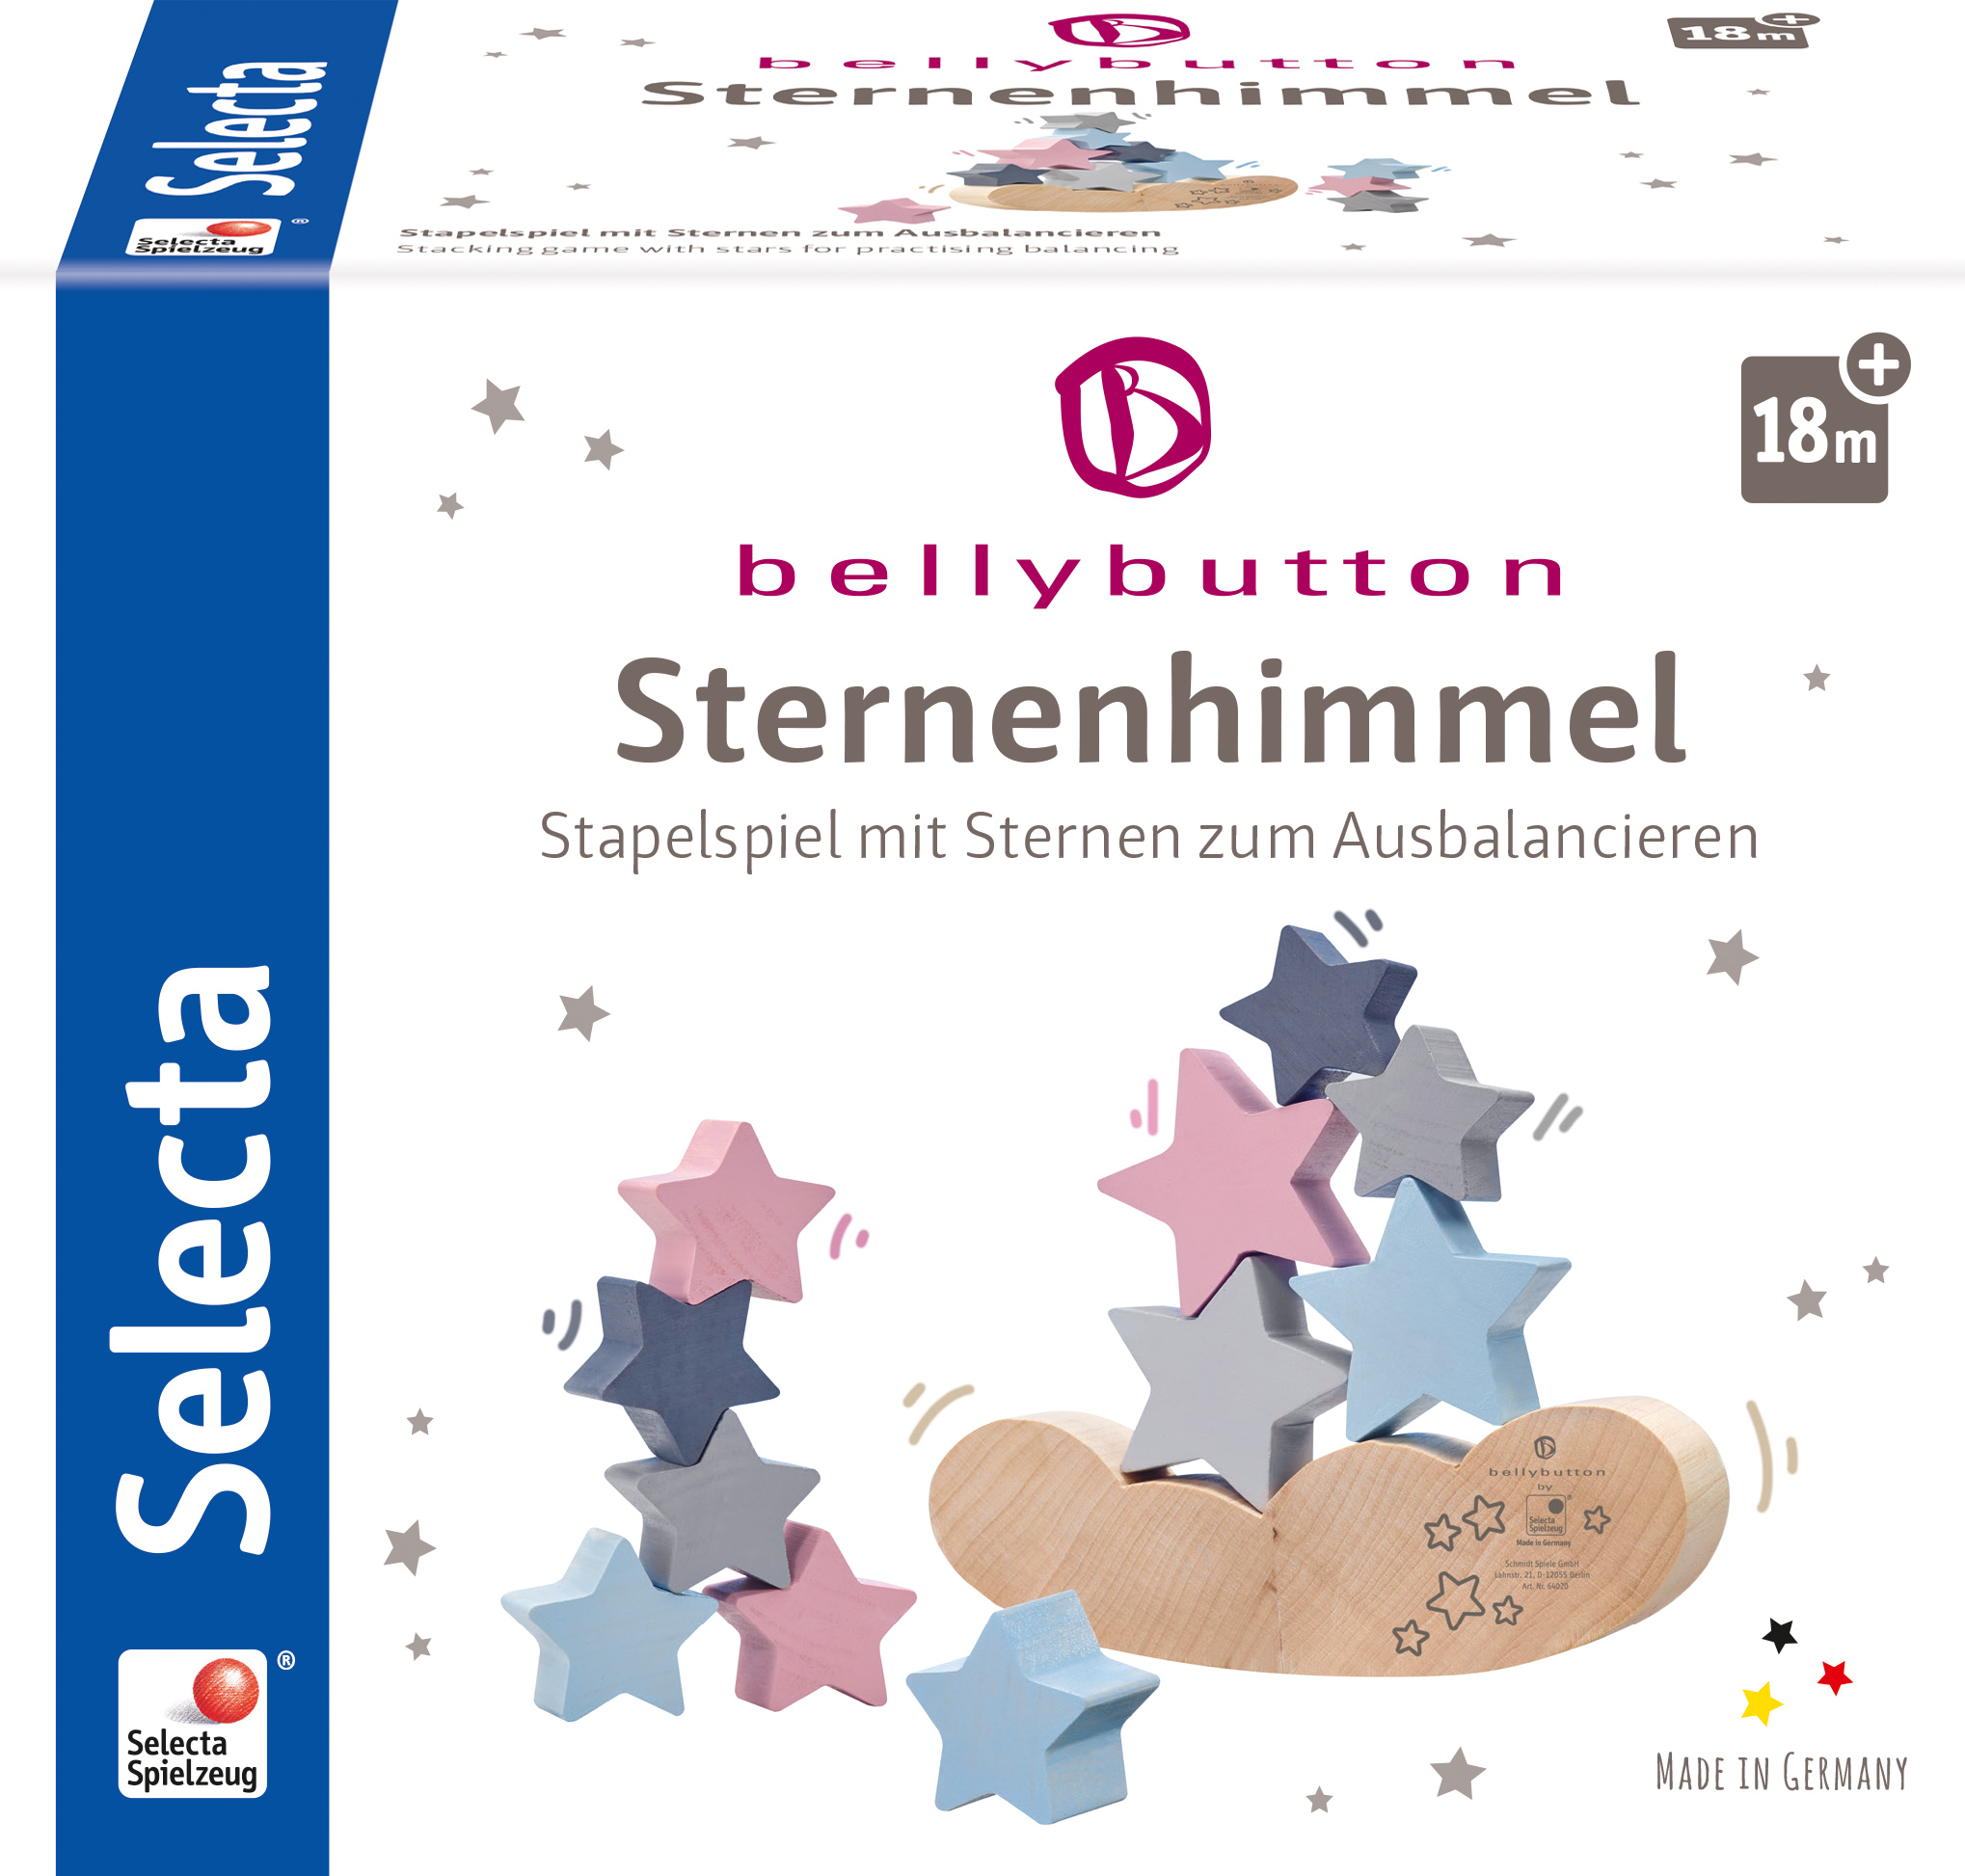 Sternenhimmel, by bellybutton Holzspielzeug Teile Selecta® - 12 SELECTA nein